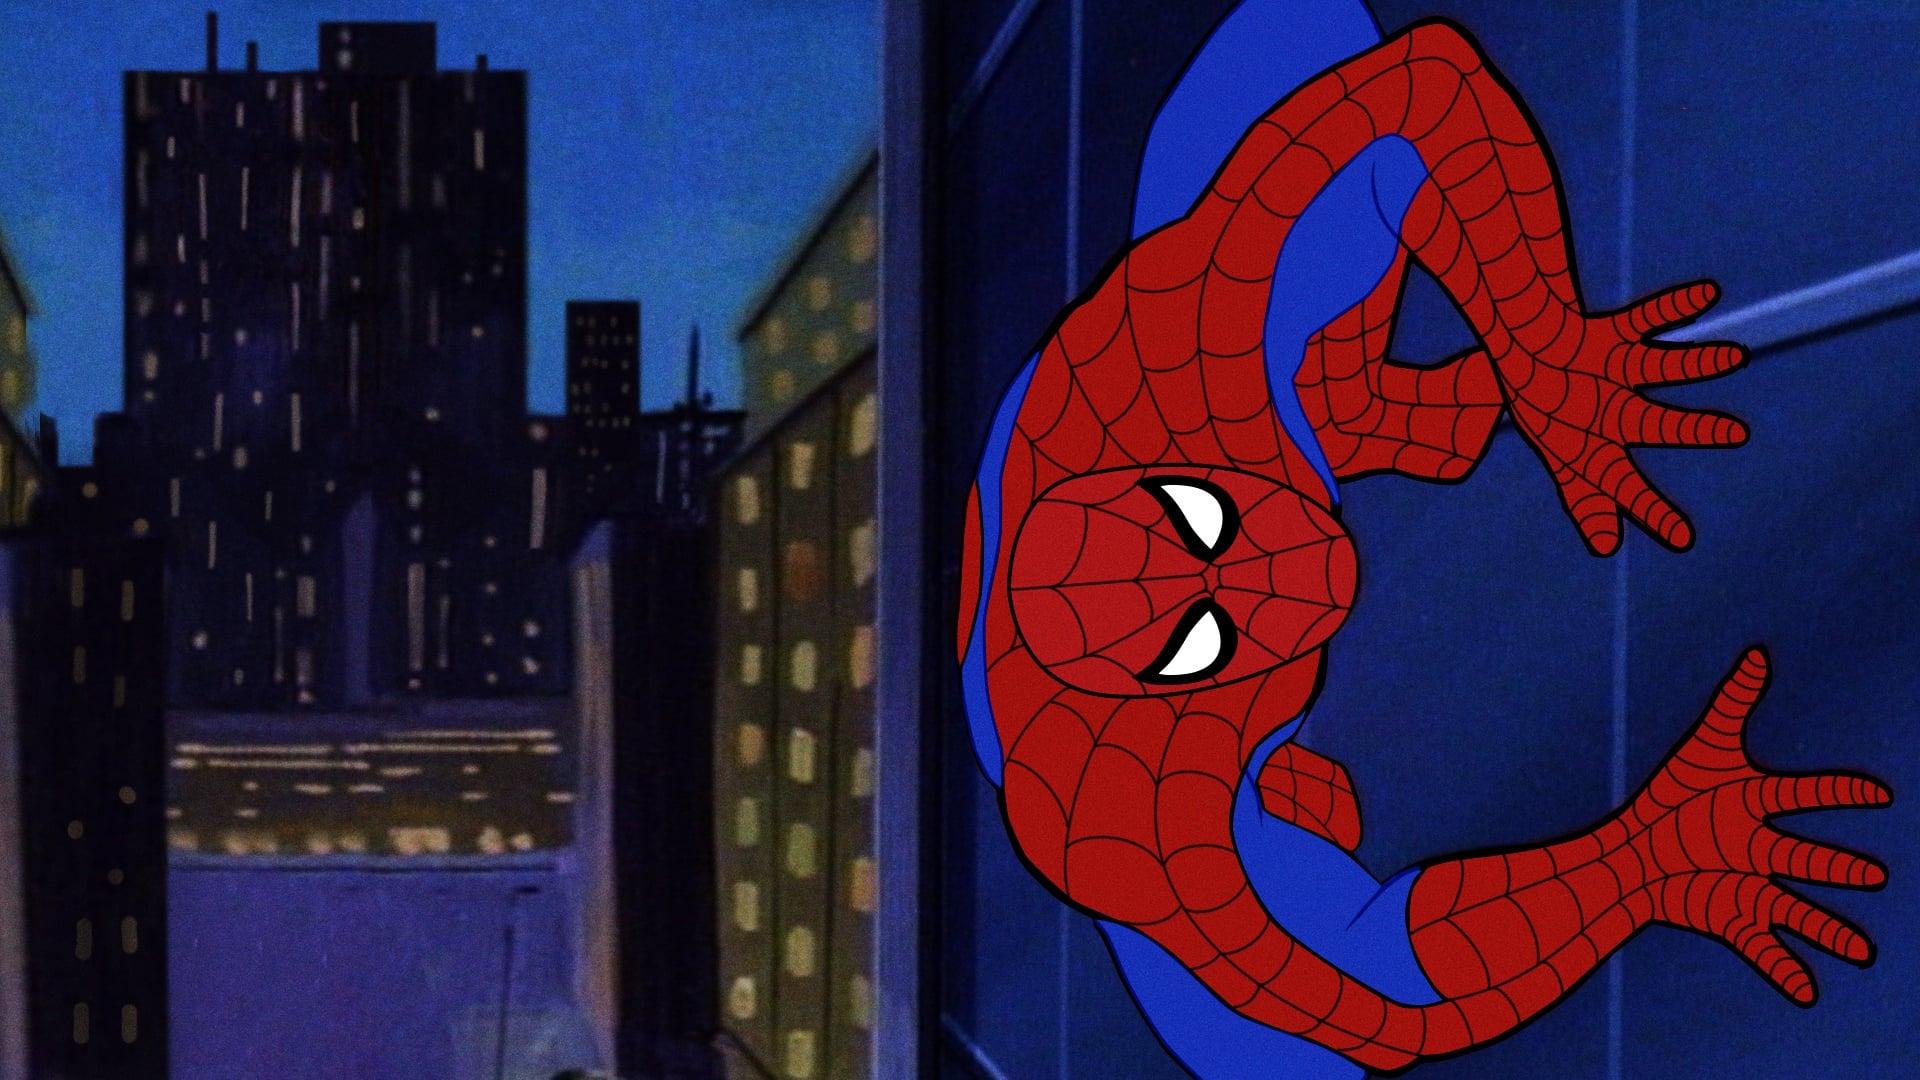 Spider-Man and His Amazing Friends backdrop